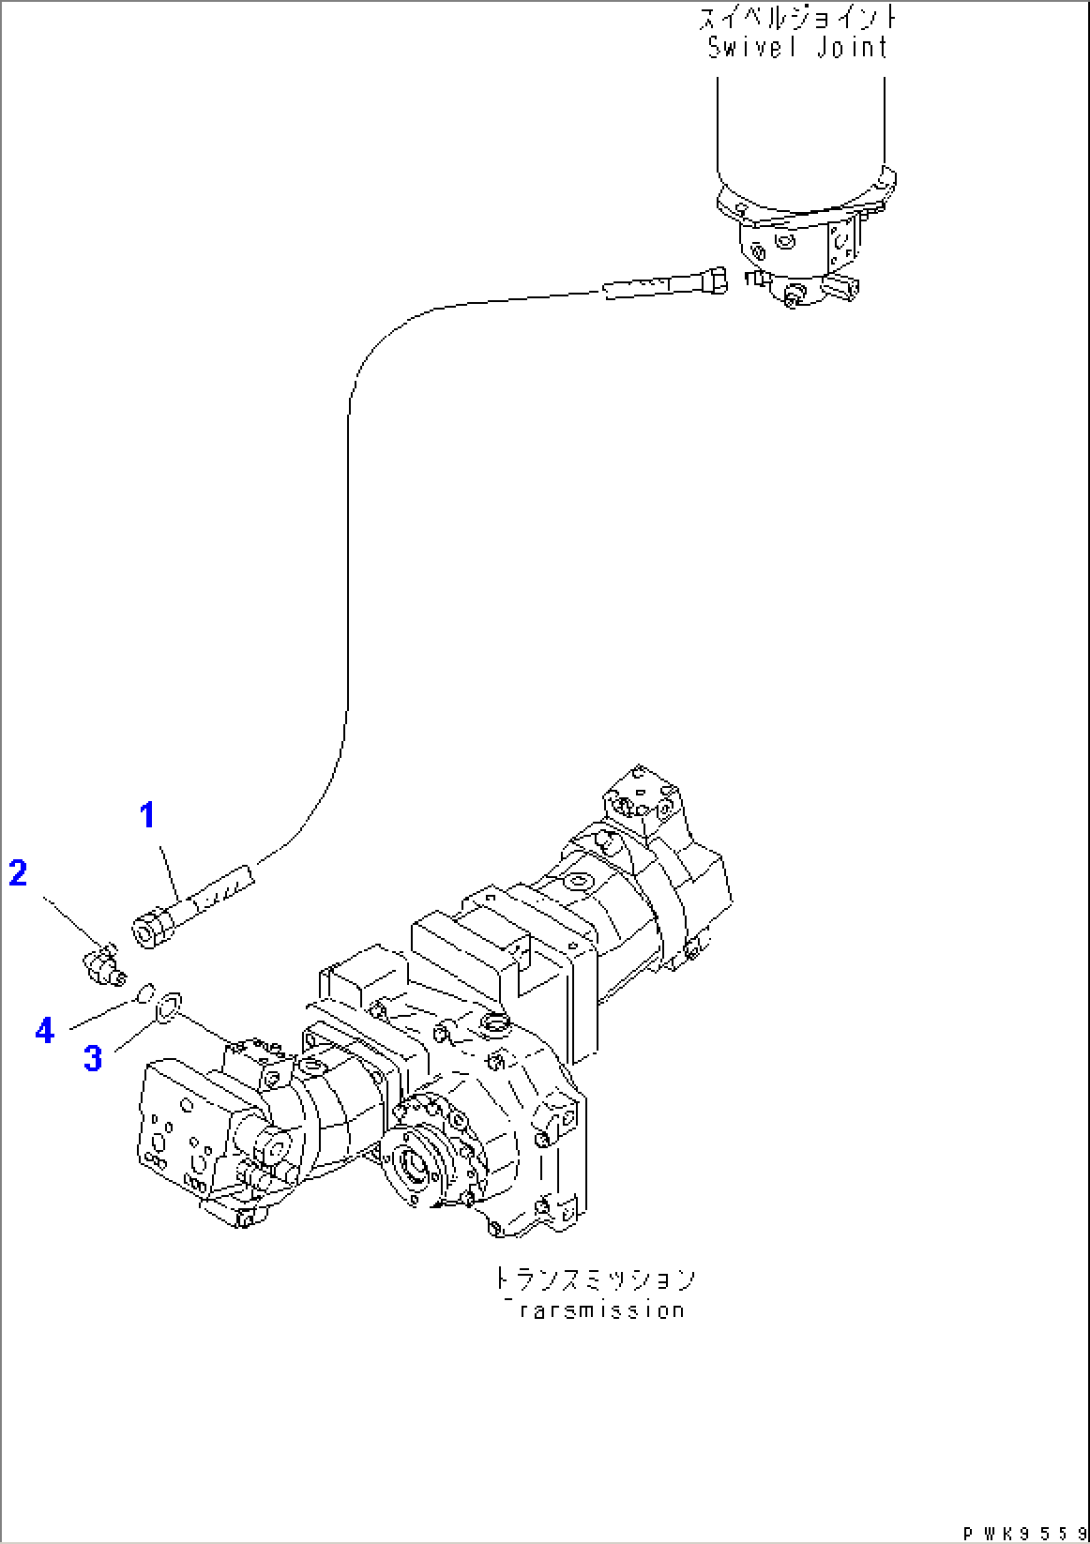 TRAVEL LINE (SWIVEL JOINT TO HI-LOW SELECTOR VALVE)(#K32001-)